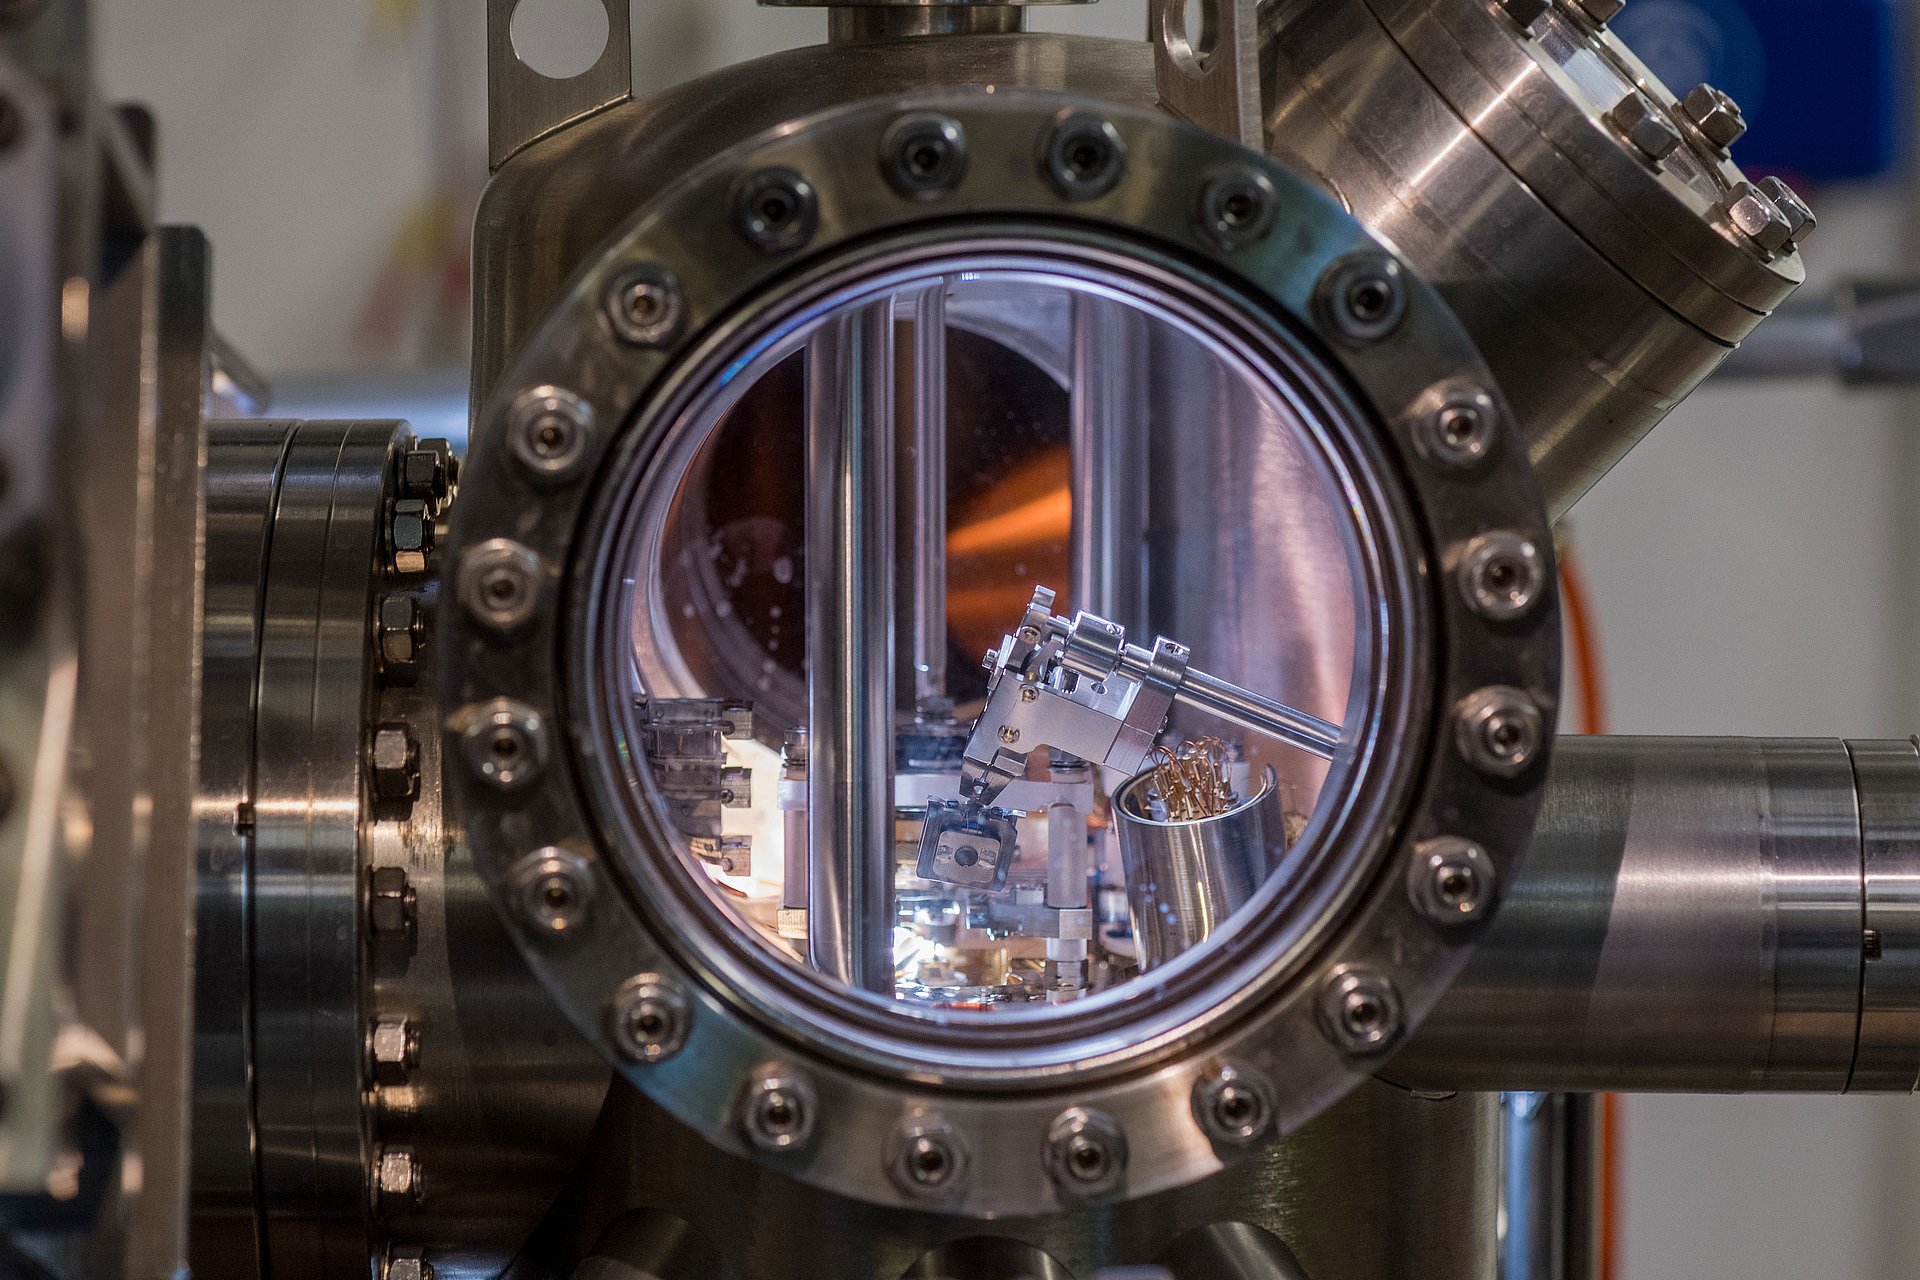 The sample is positioned in the scanning tunnelling microscope (STM), which is located in the vacuum chamber.